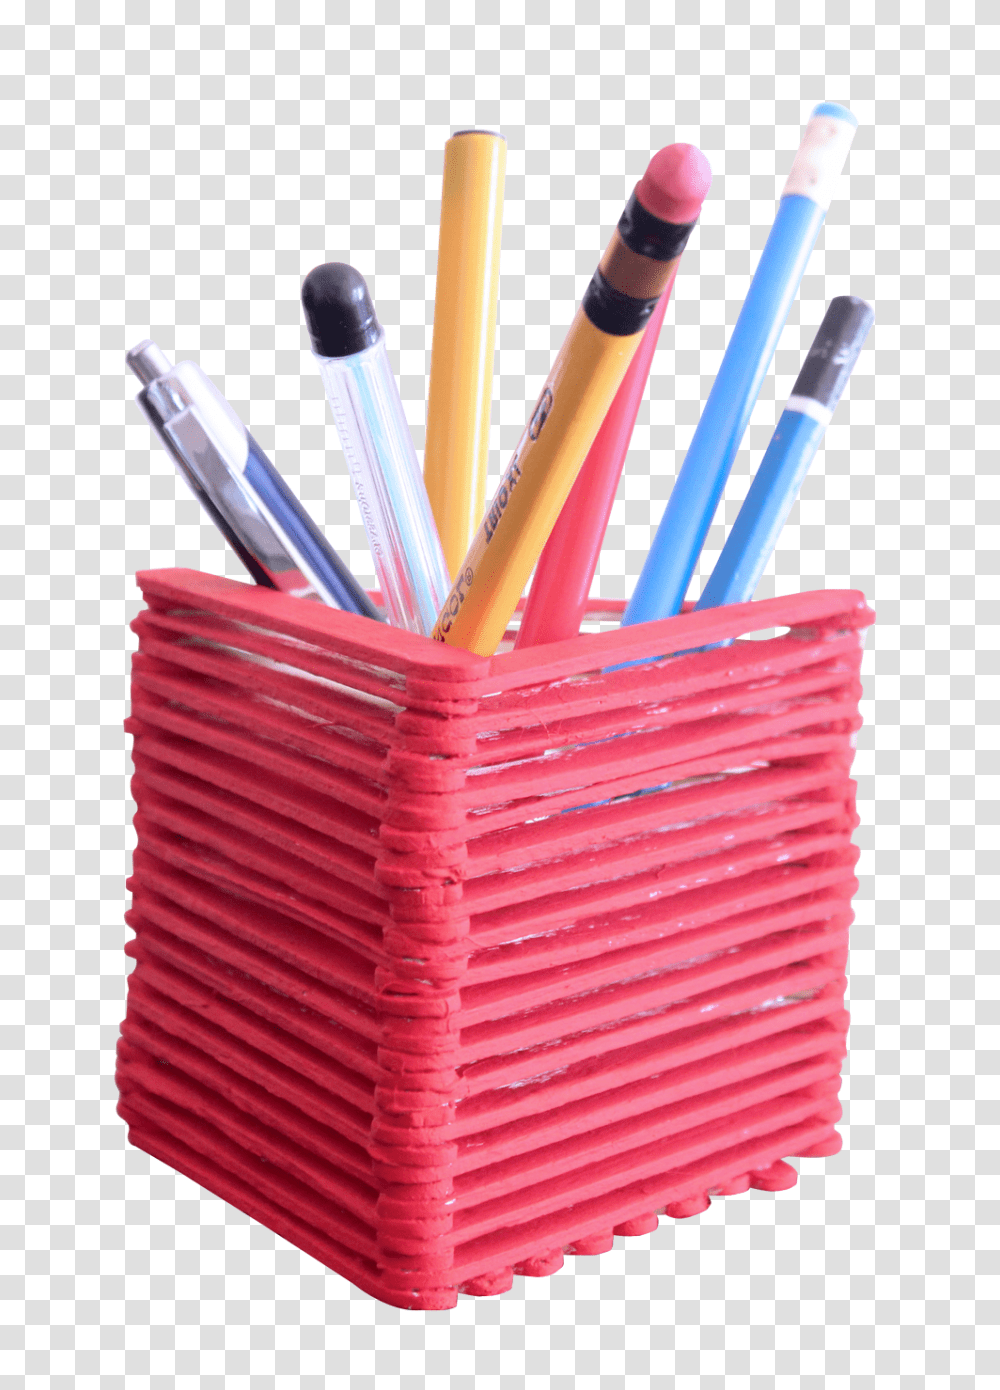 Pen Stand Image Pen Stand, Brush, Tool, Basket, Toothbrush Transparent Png